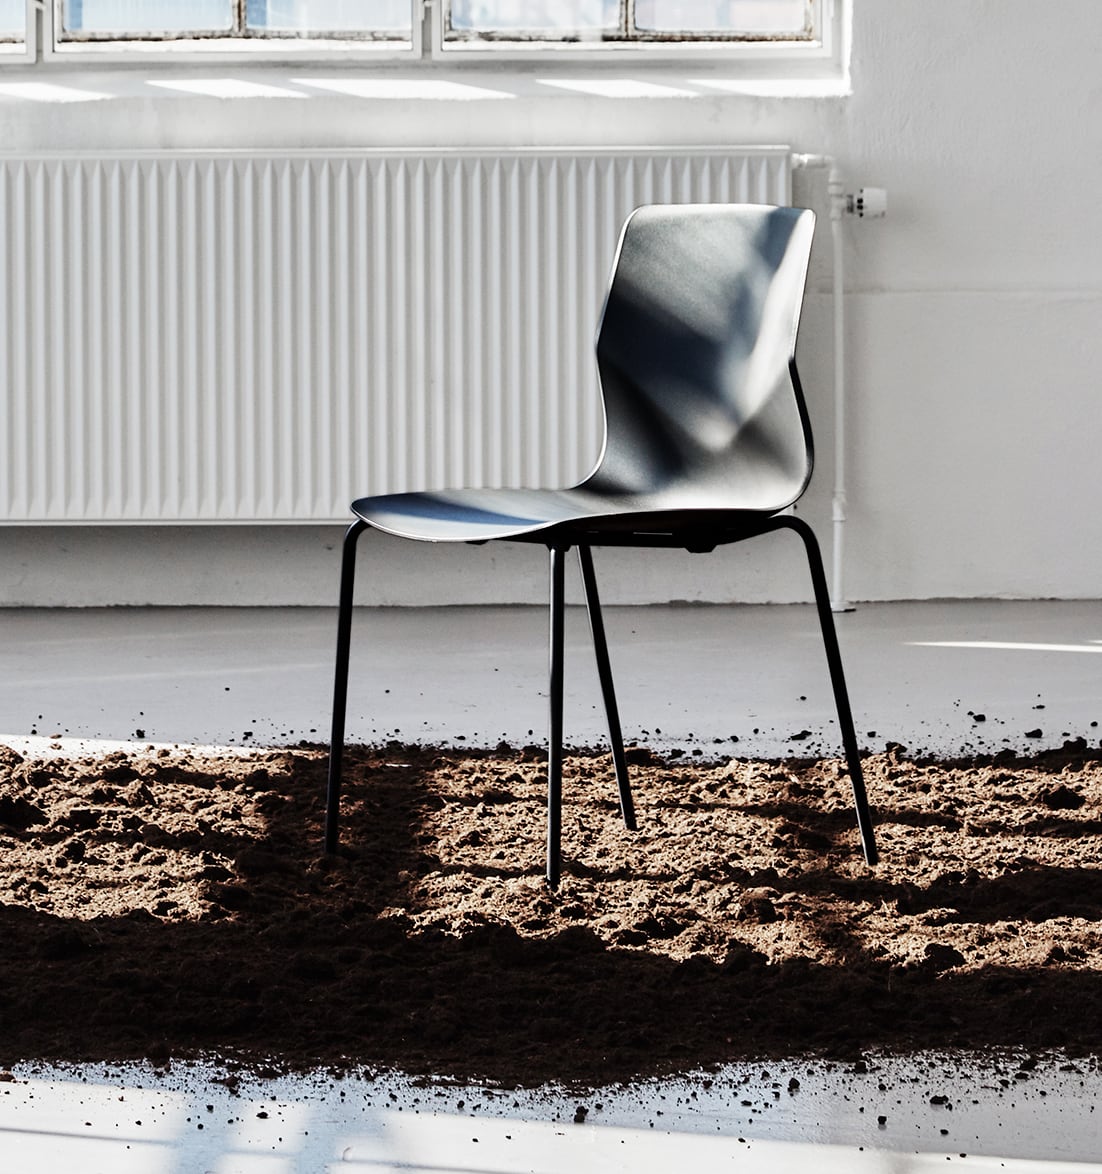 A black chair sits in the dirt in front of a window.